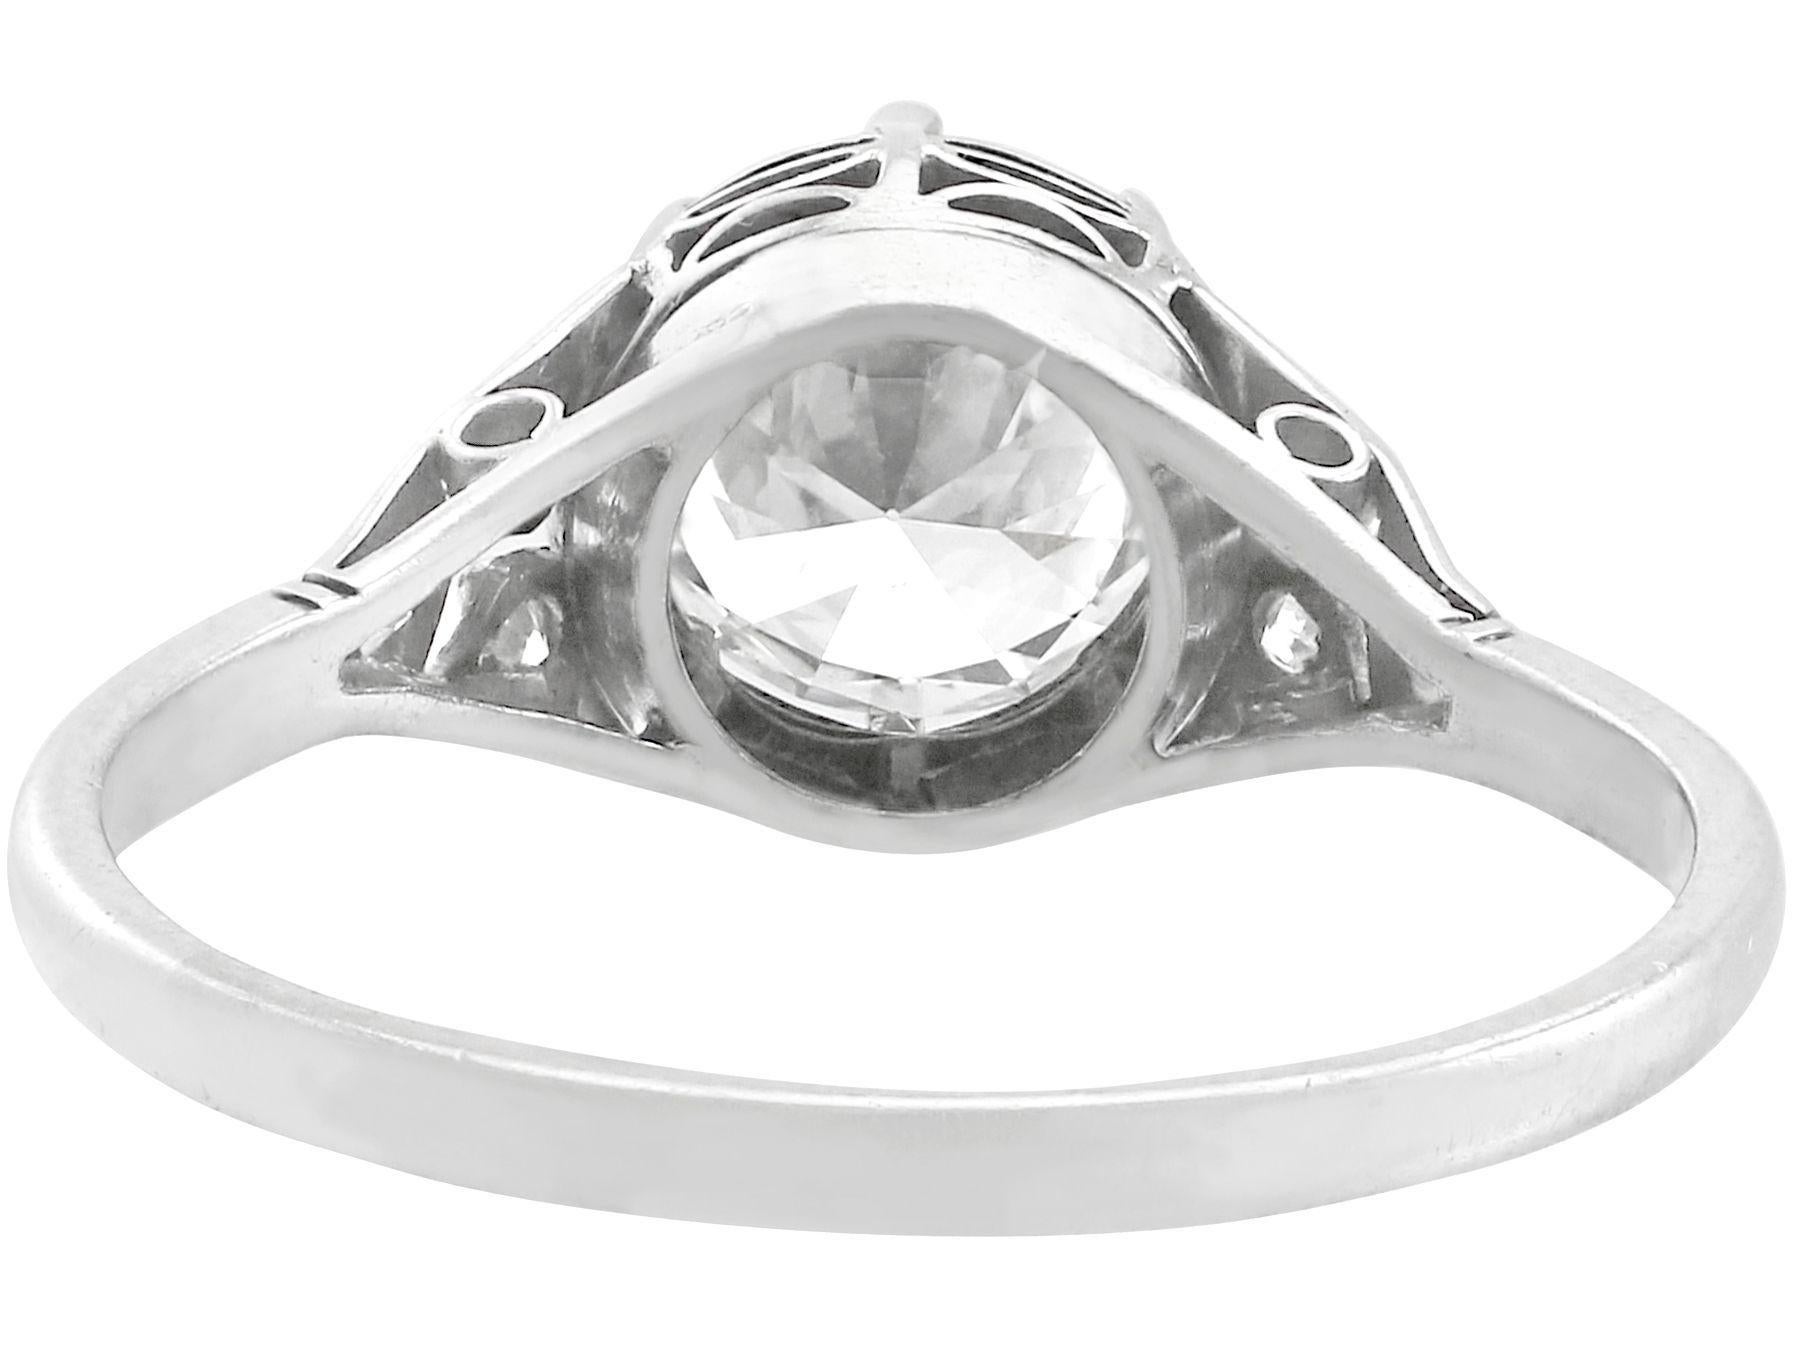 Women's Antique 1920s 1.60 Carat Diamond and White Gold Solitaire Ring